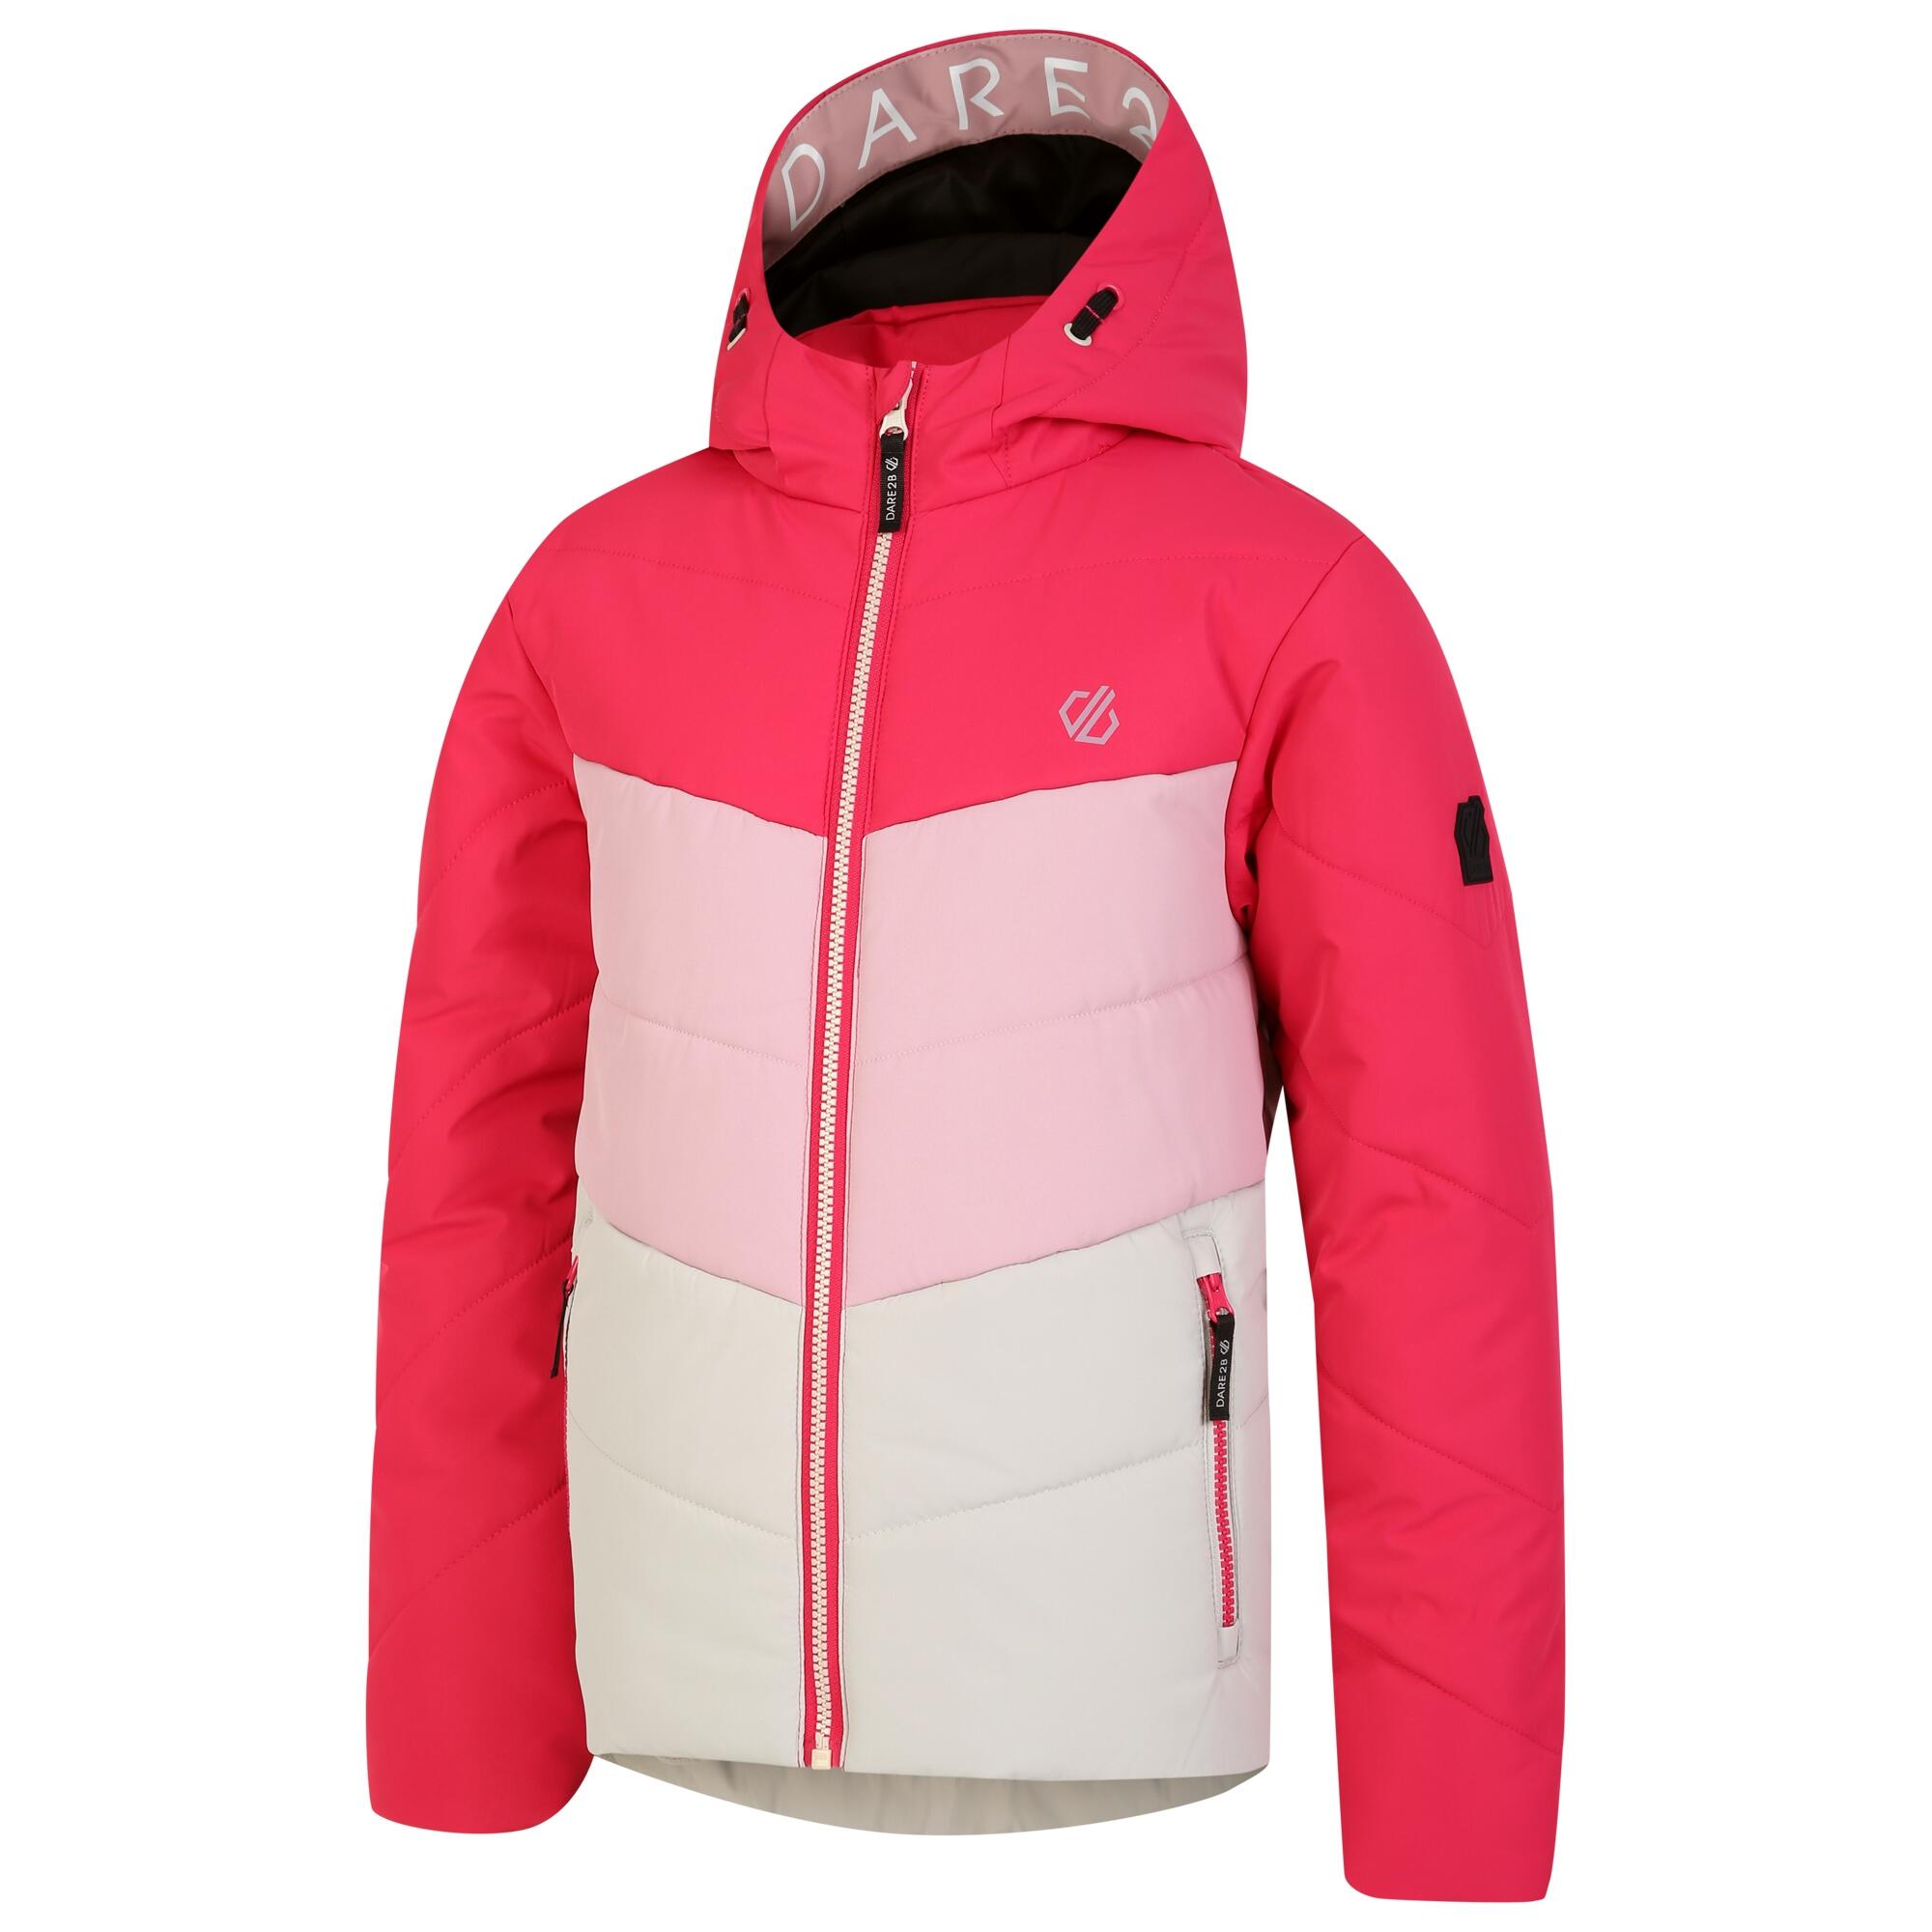 Childrens/Kids Jolly Padded Jacket (Berry Pink/Pale Mauve) 3/5